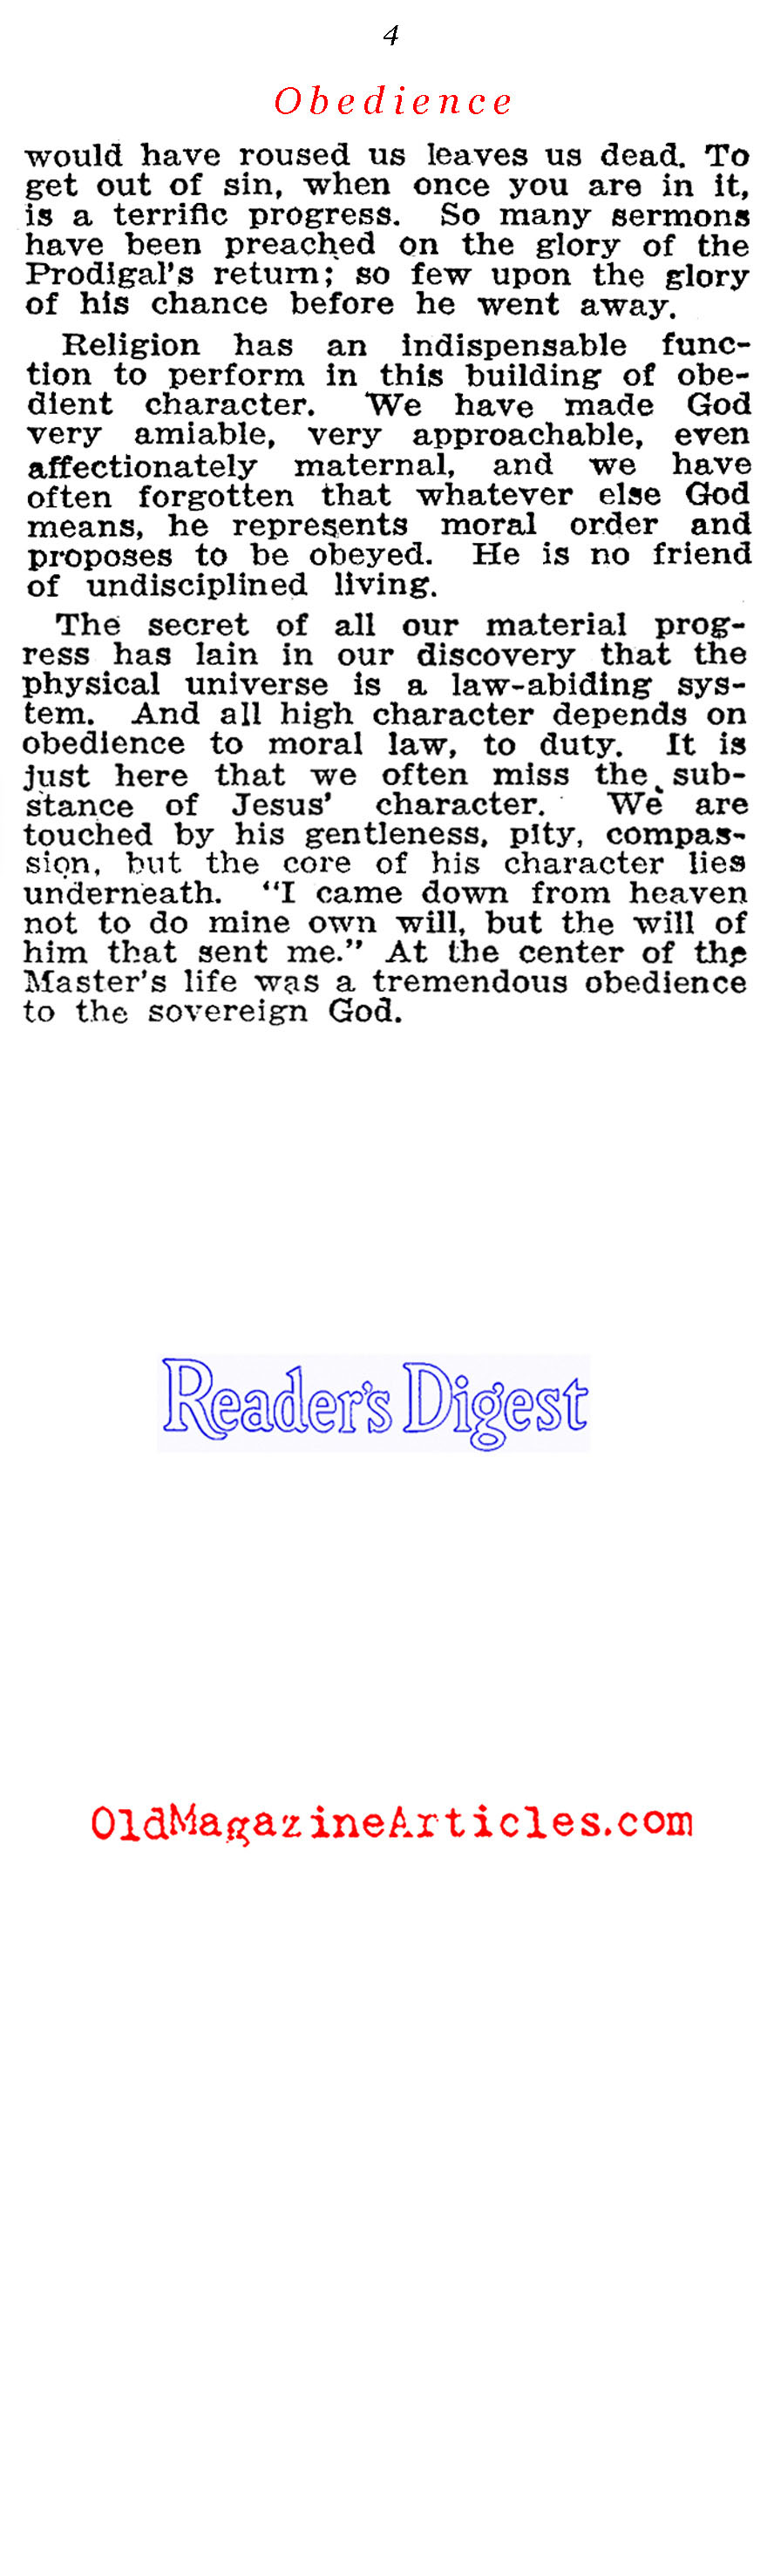 The Spirit of Disobedience (Reader's Digest, 1923)